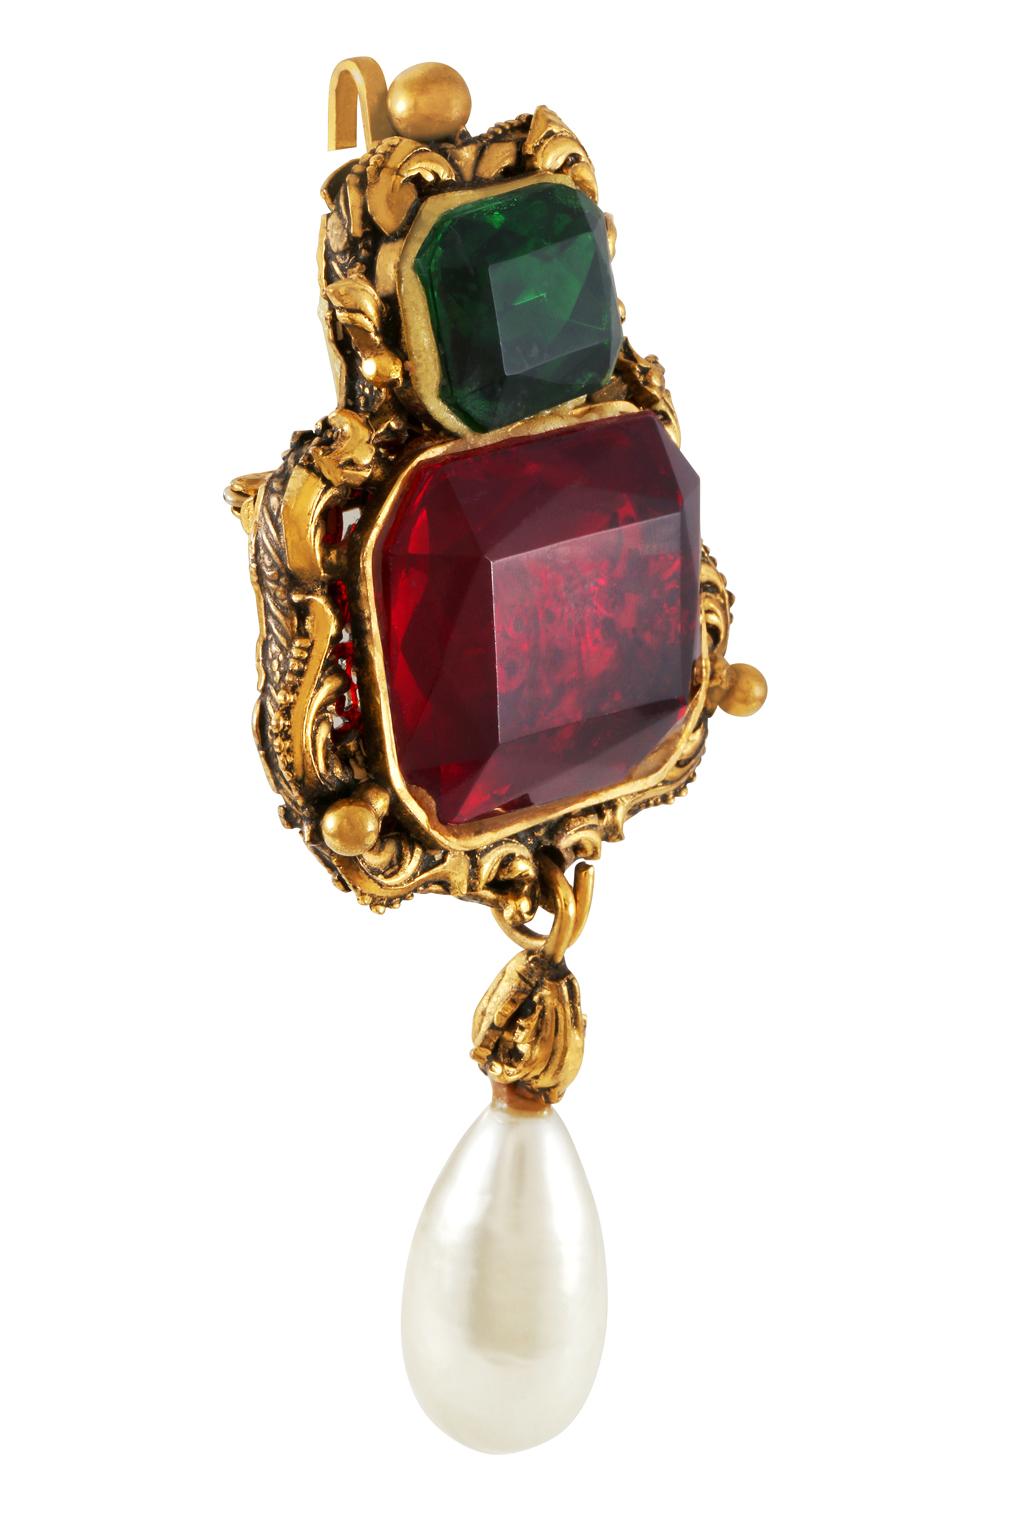 Baroque Chanel Red and Green Gripoix Emerald Cut Vintage Brooch